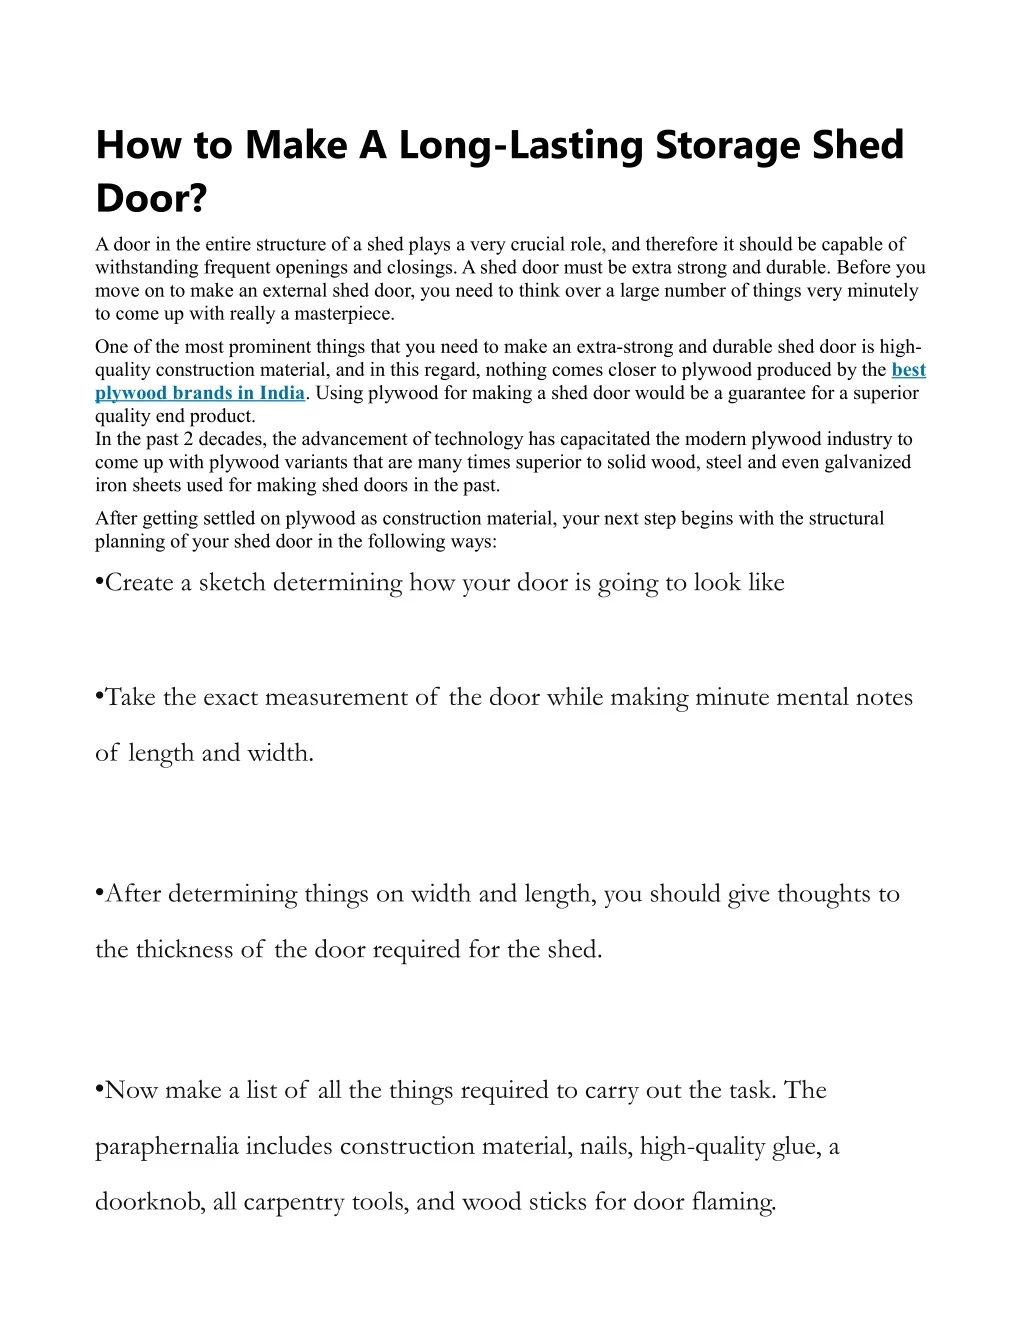 how to make a long lasting storage shed door